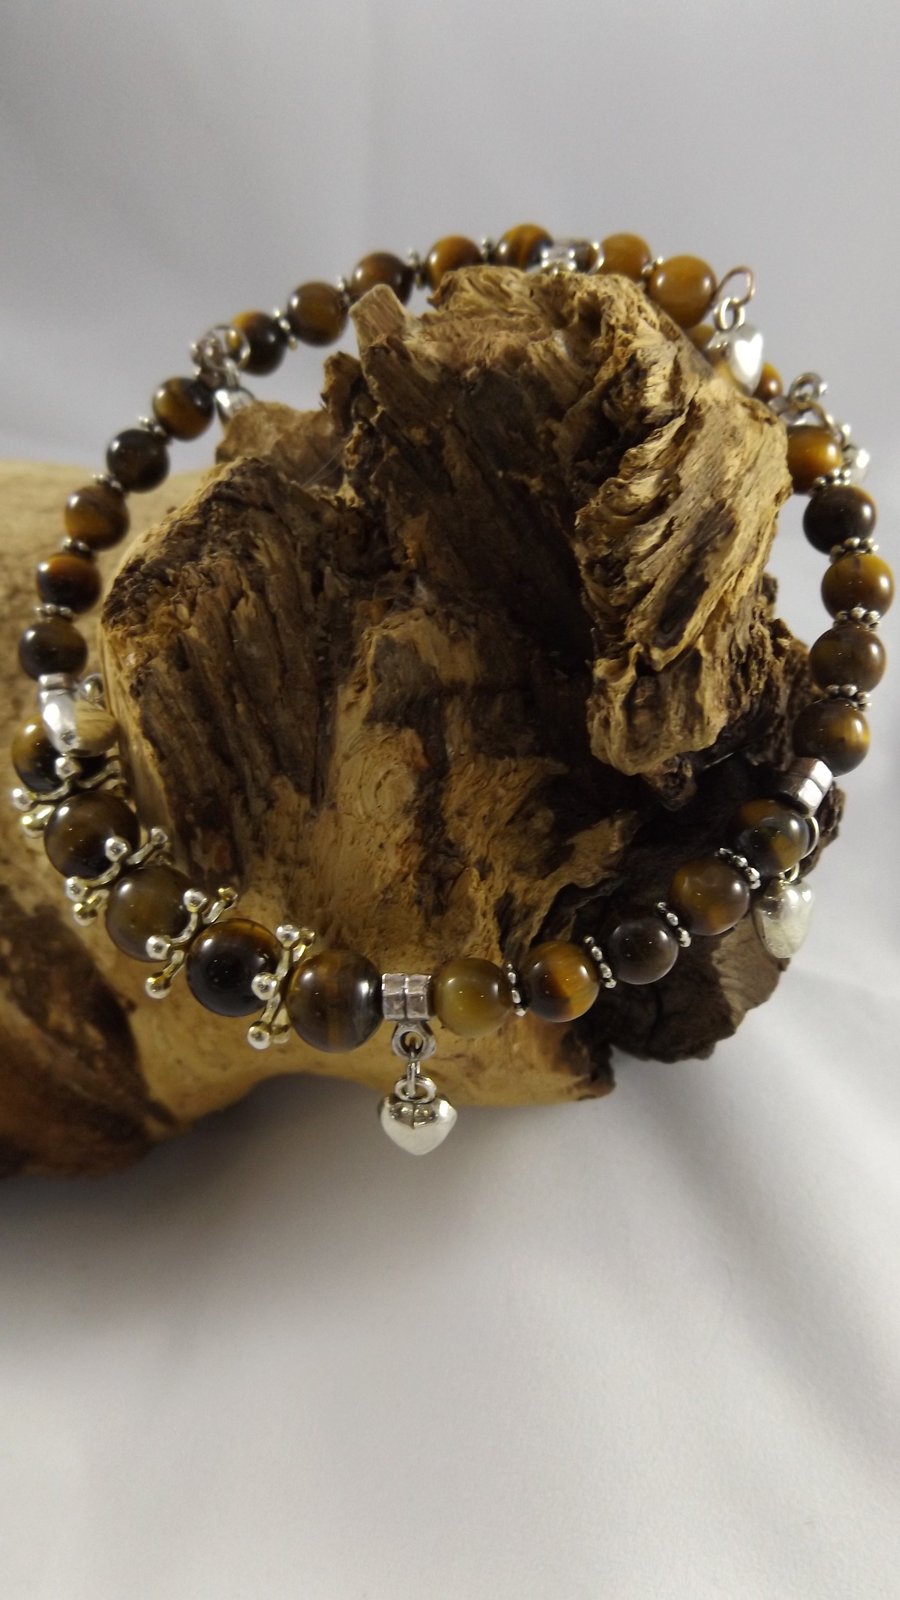 Tiger's eye memory wire bracelet with silver plated puffed heart charms